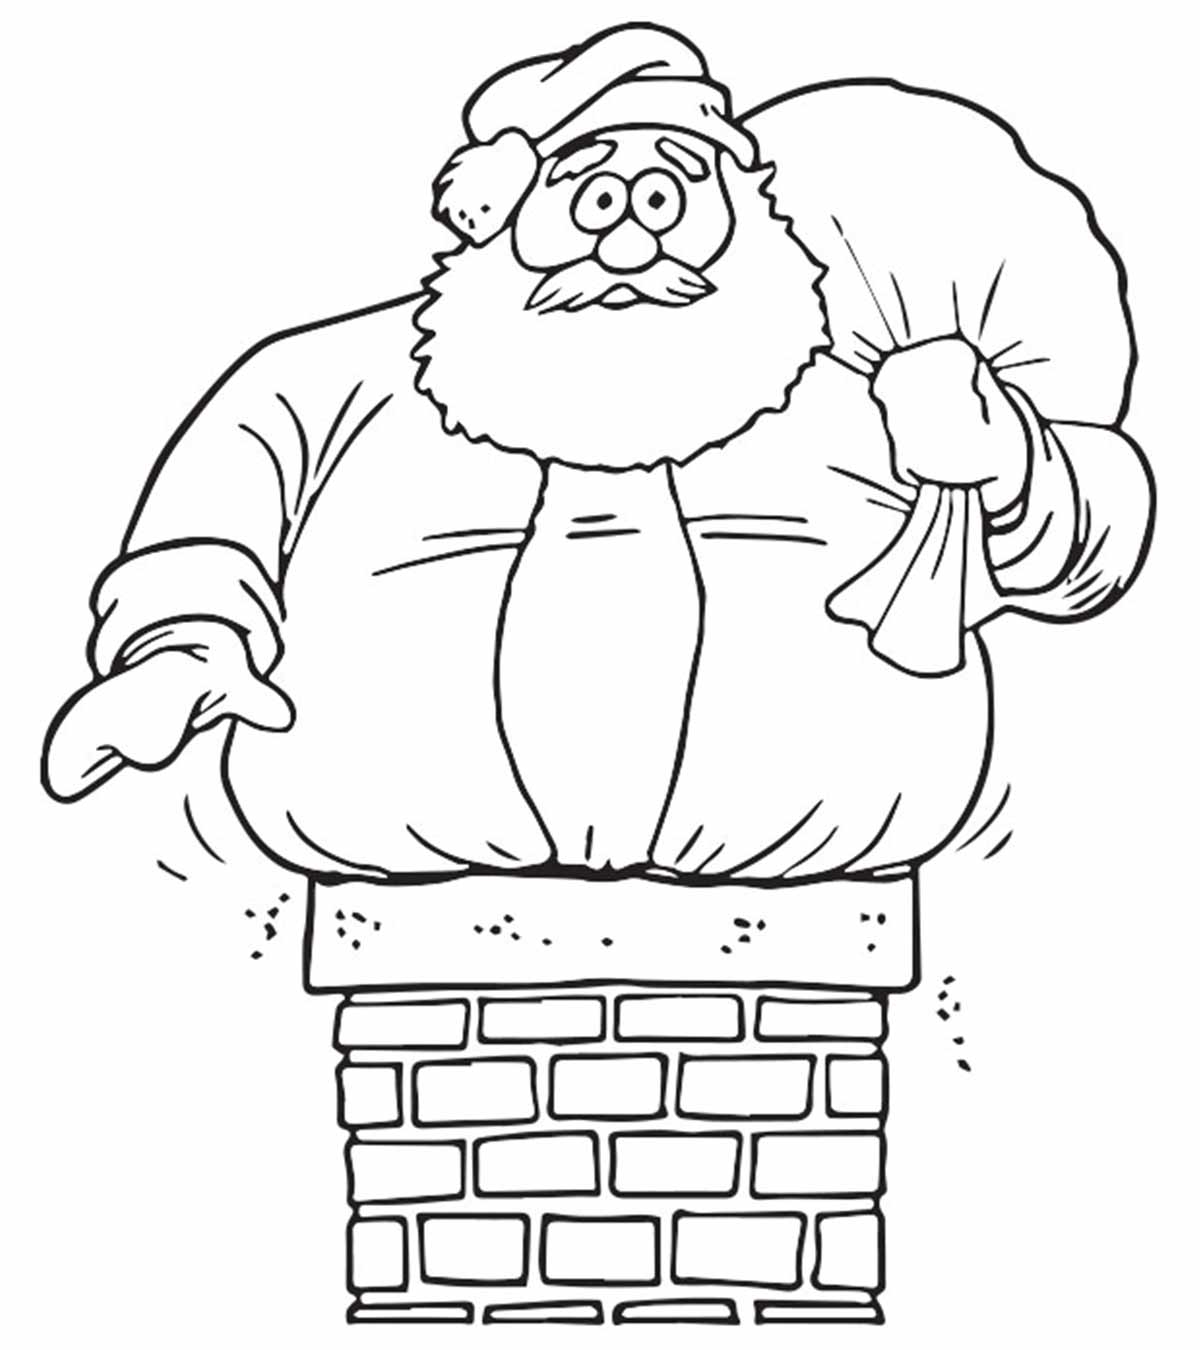 14 Cute Santa Claus Coloring Pages For Your Little Ones